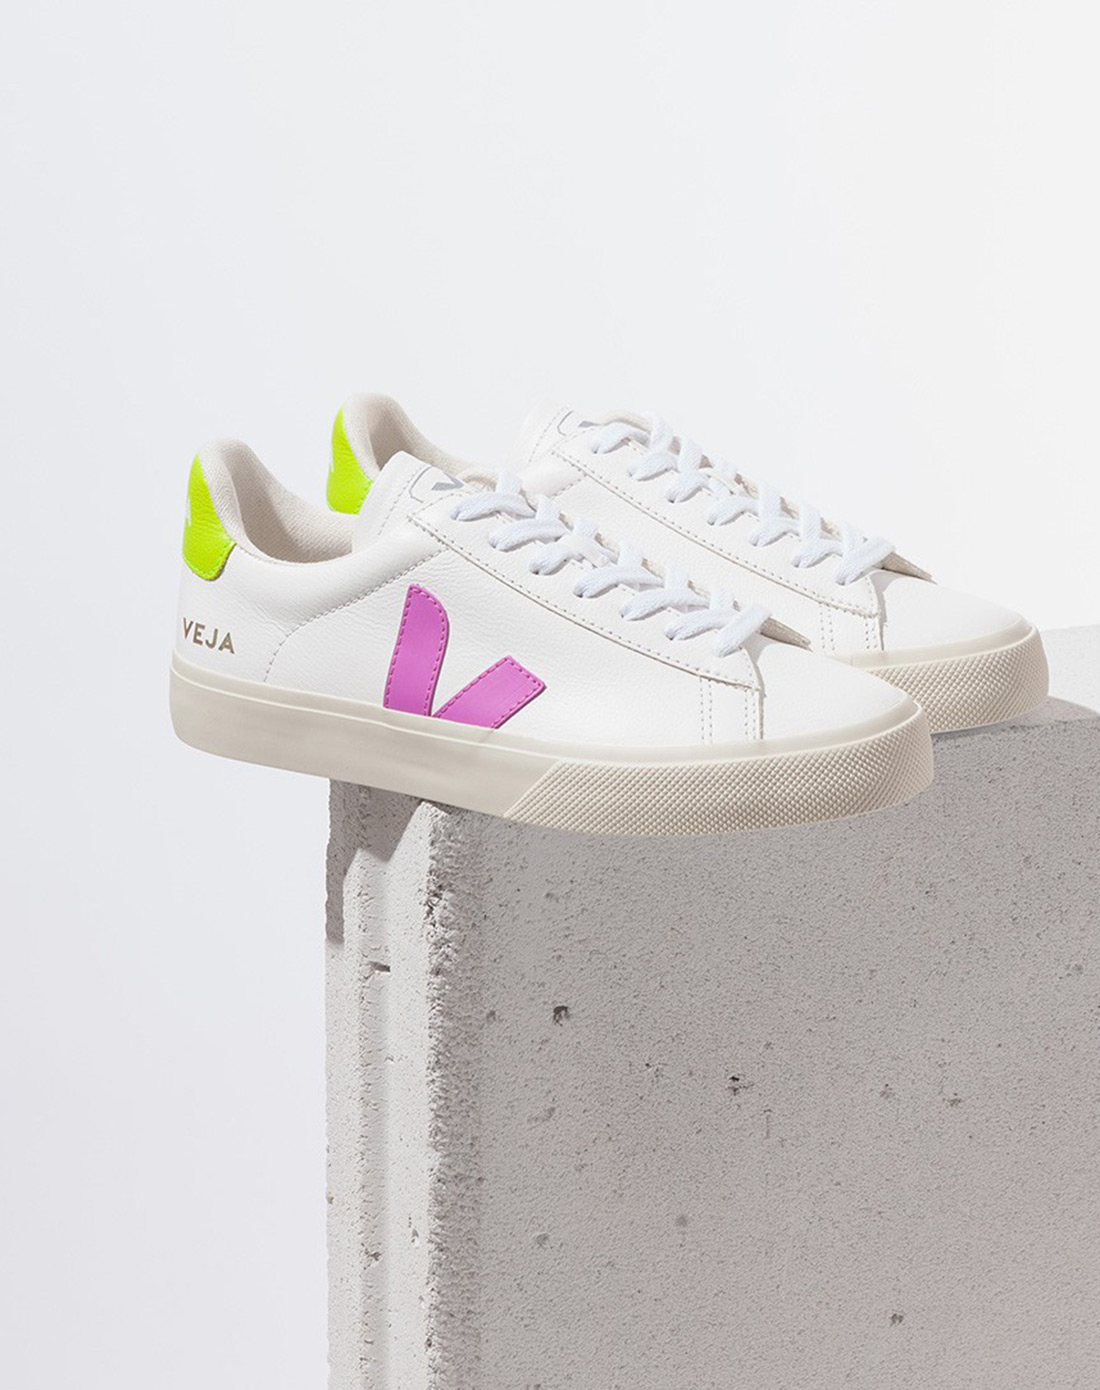 veja sneakers where to buy how to wear new fashion spring summer